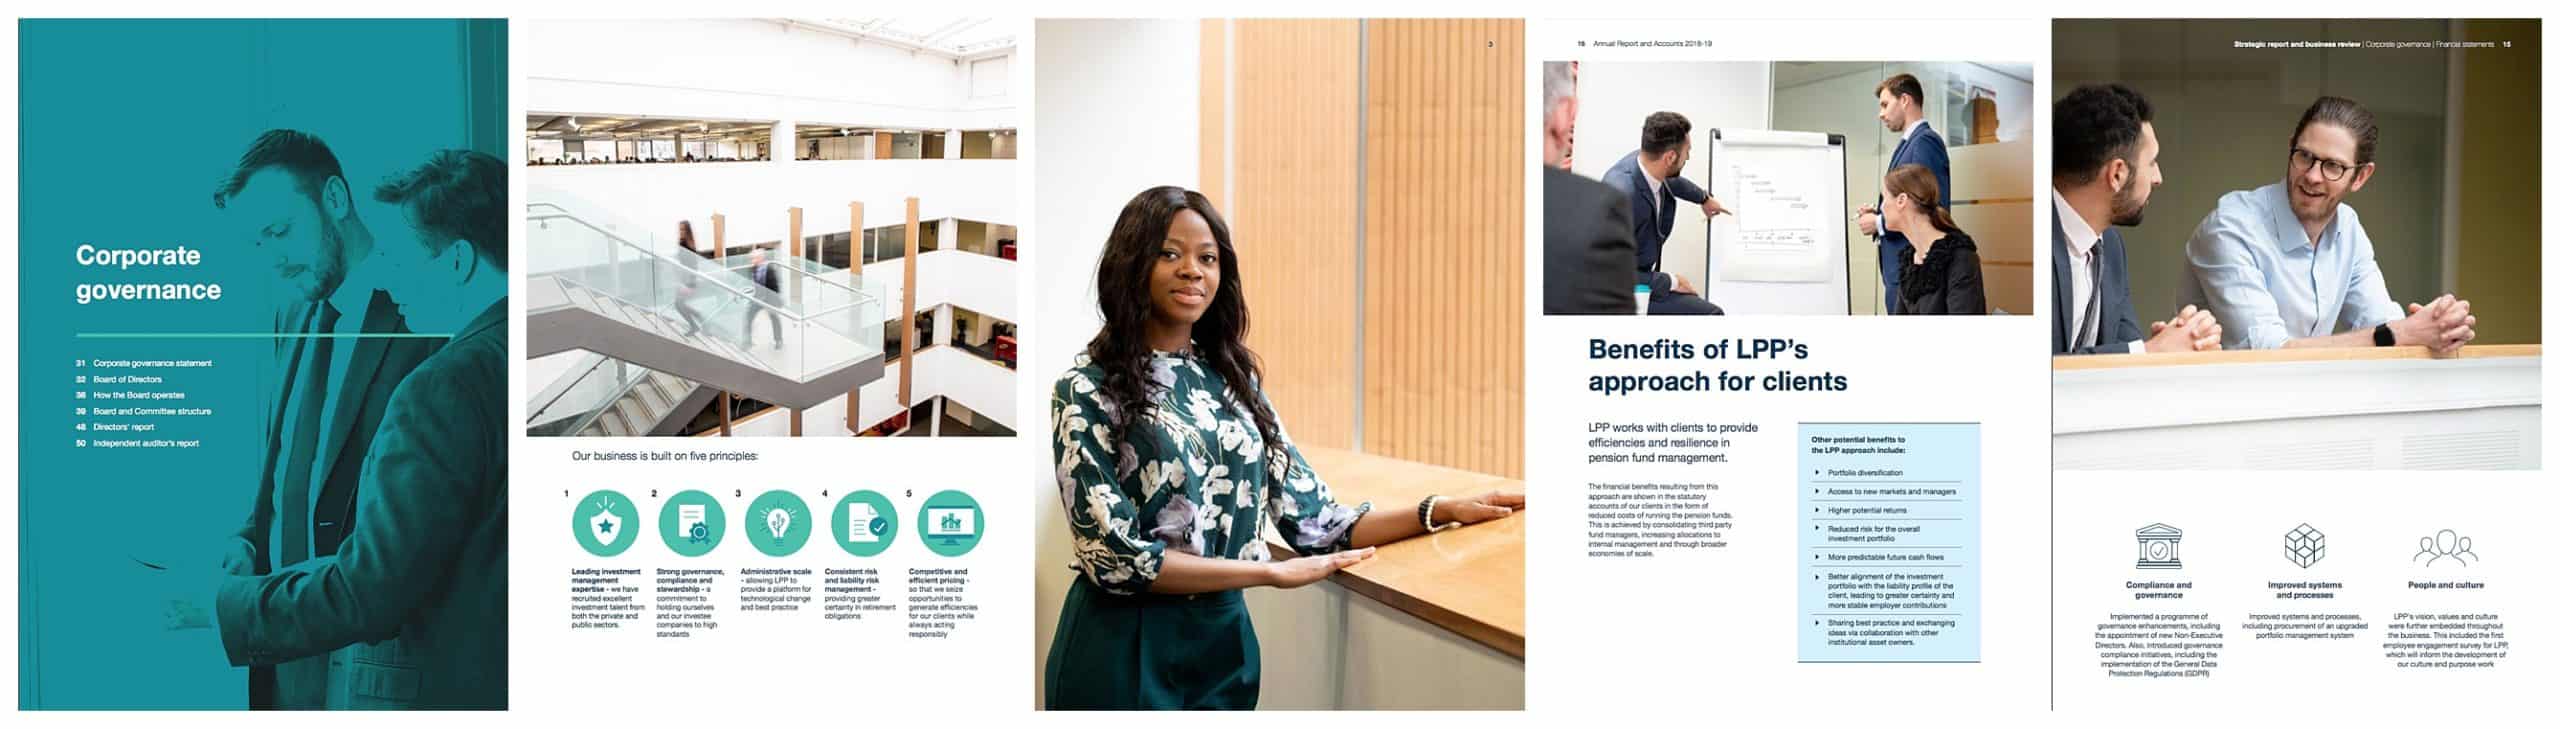 annual report corporate photography